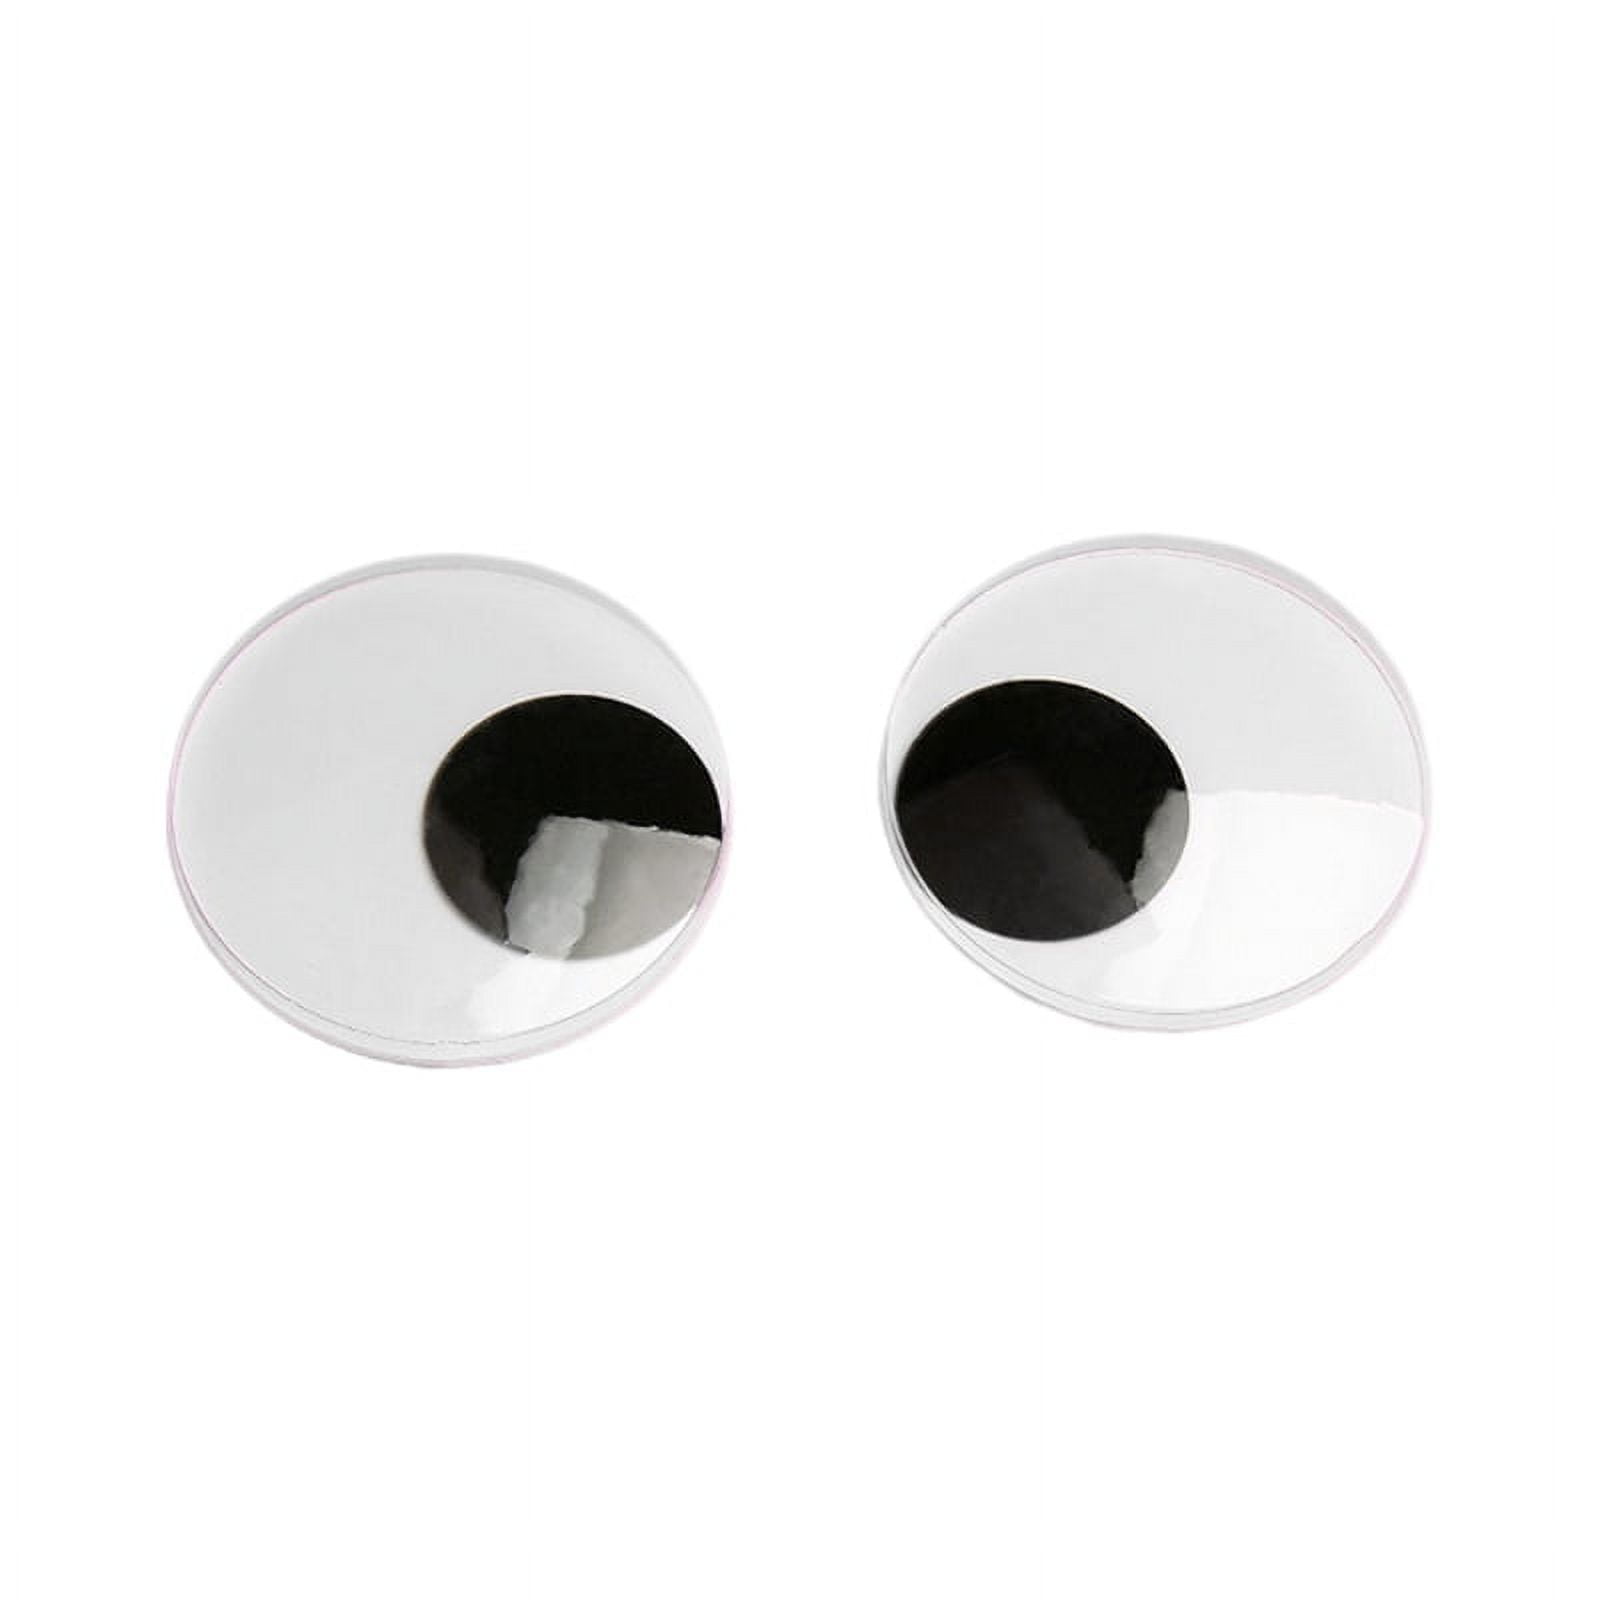 7.5 Inch Giant Googly Eyes Plastic Wiggle Eyes With Self Adhesive